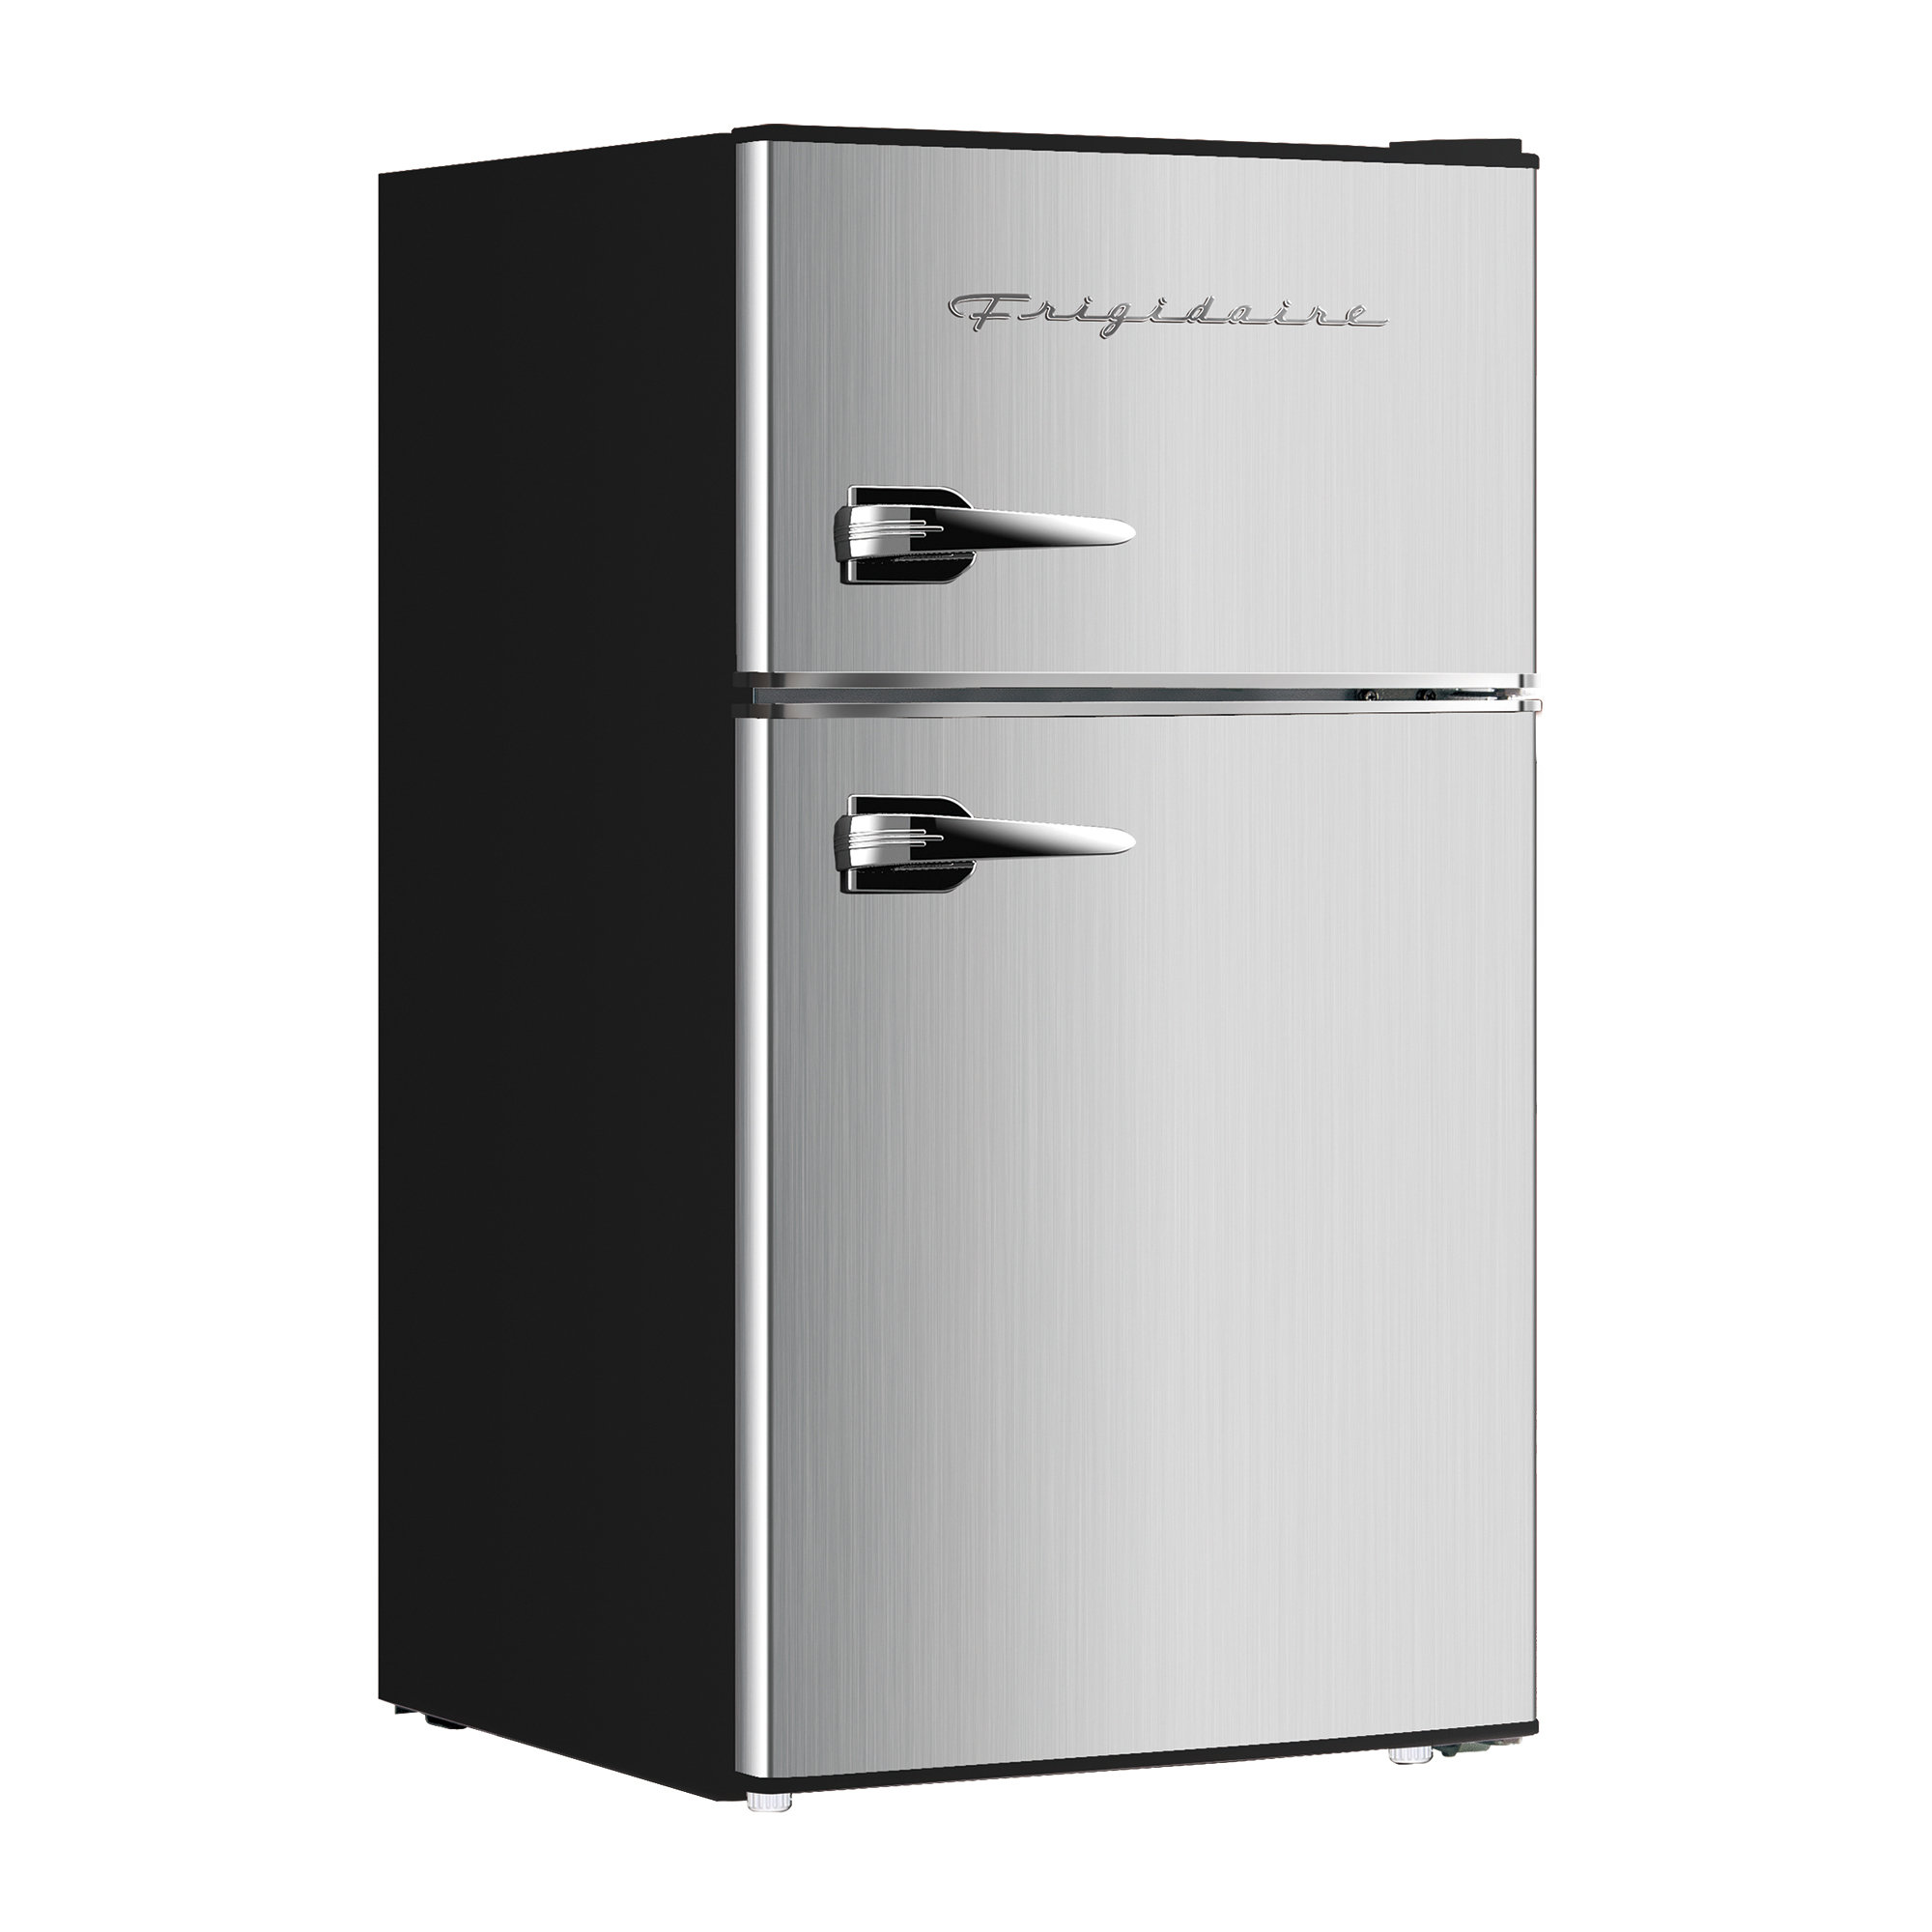 R.W.FLAME Double Door 3.2 Cubic Feet cu. ft. Compact Refrigerator